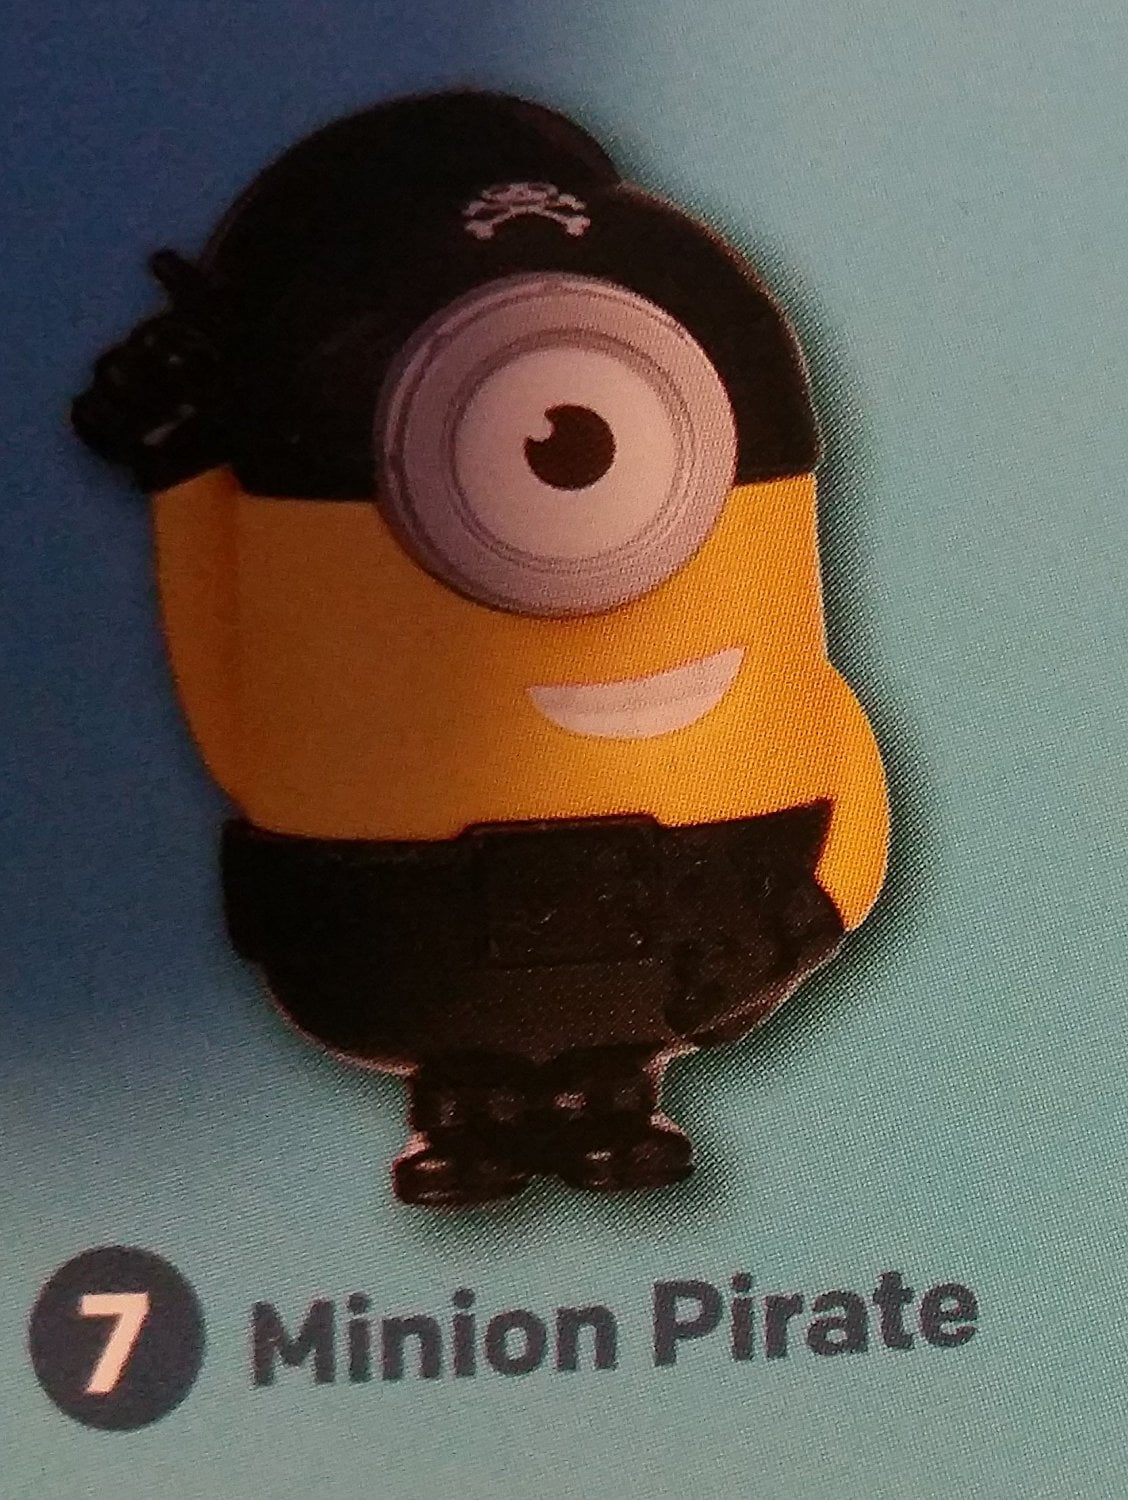 Details about   Minions 2015 McDonald's Happy Meal Toy #7 Talking Pirate Minion 3.5" 